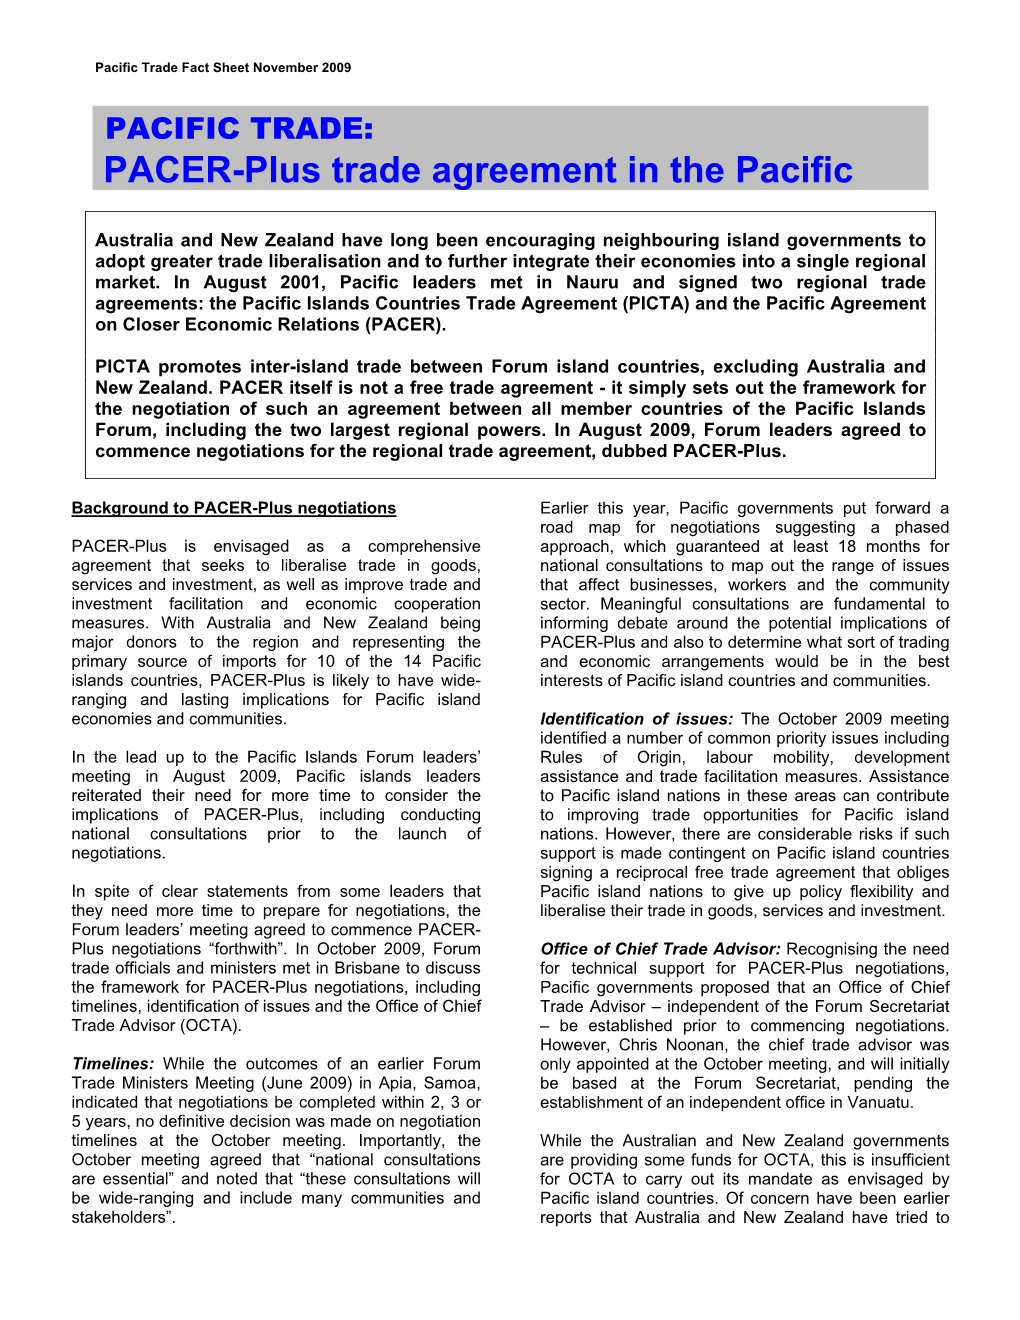 PACER-Plus Trade Agreement in the Pacific